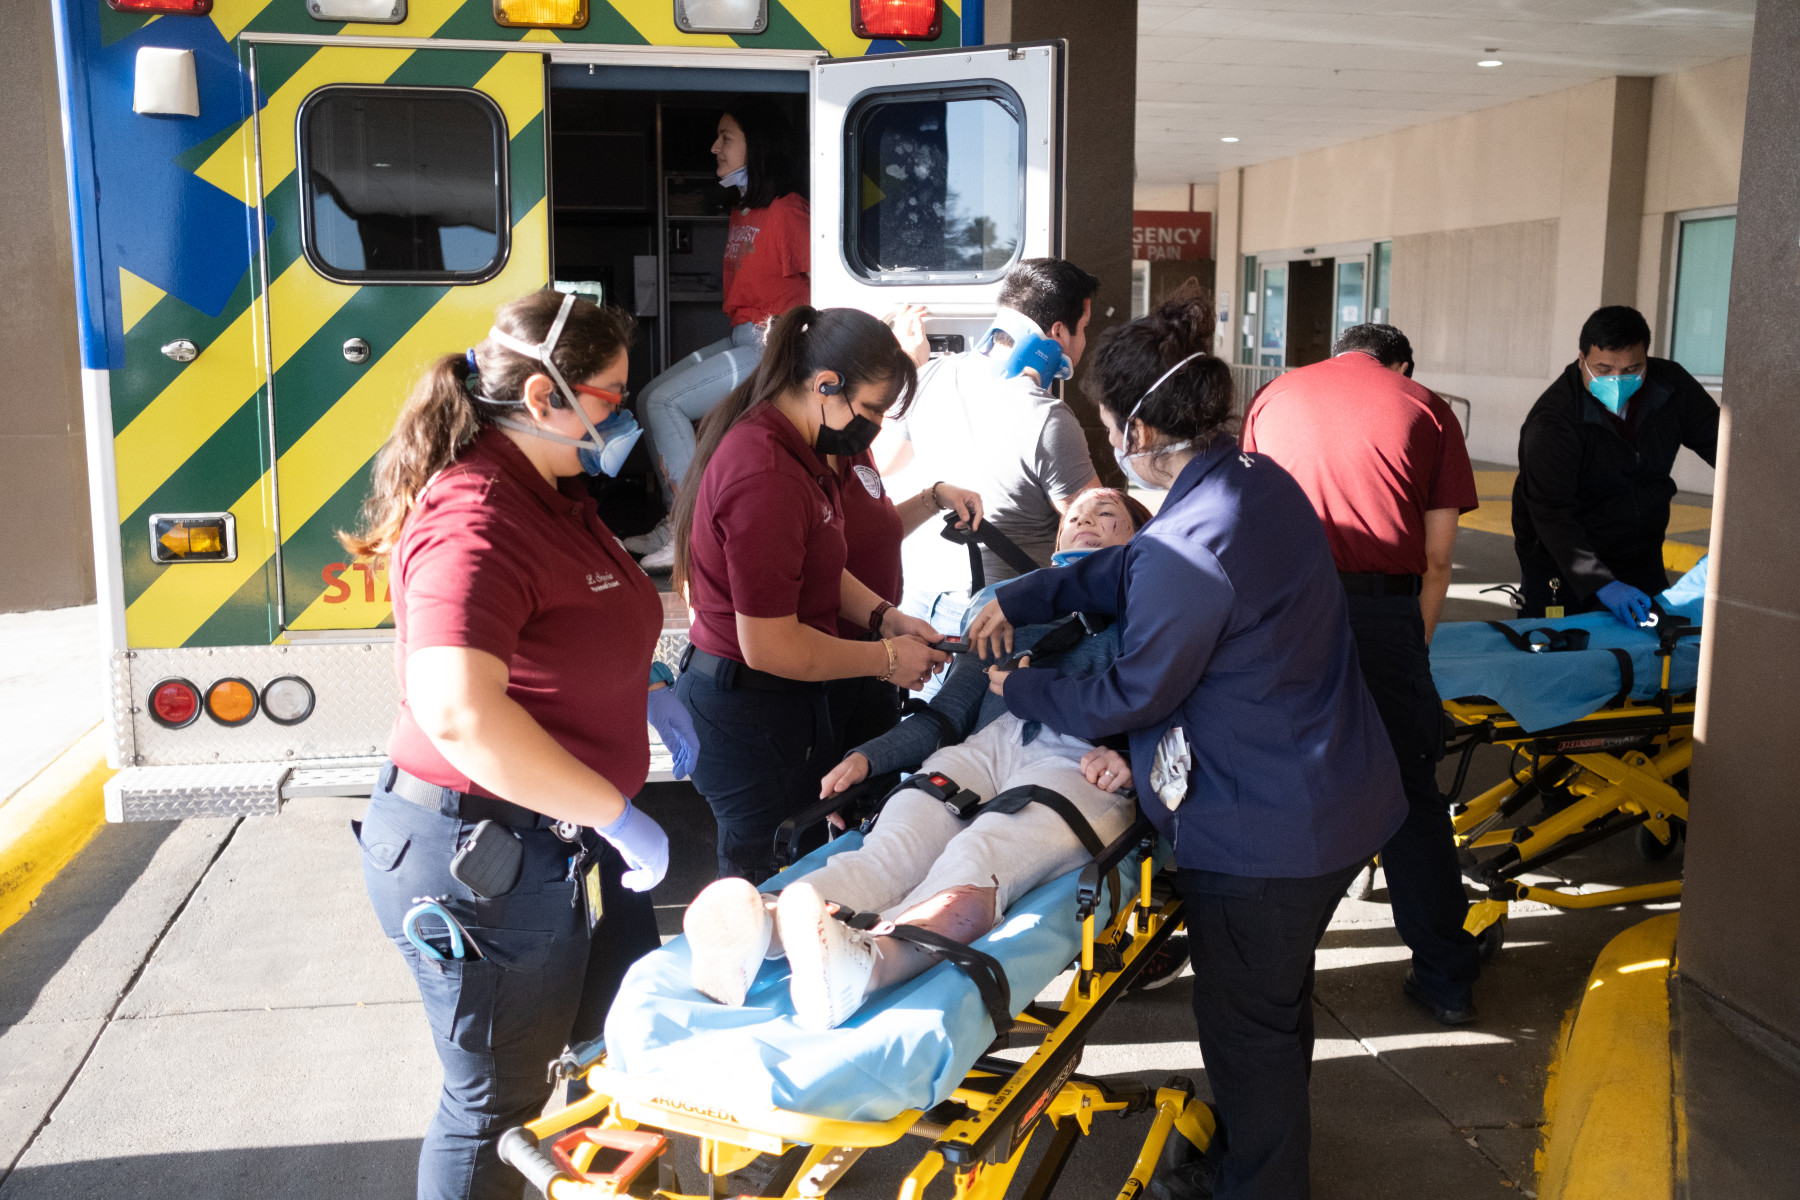 STC announces college credit opportunity for certified EMTs